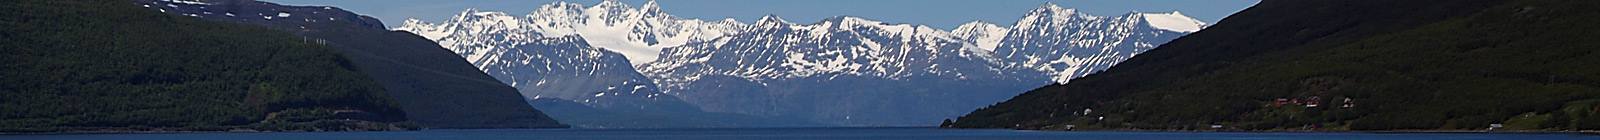 Norway and snowy mountains and fjord - Banner